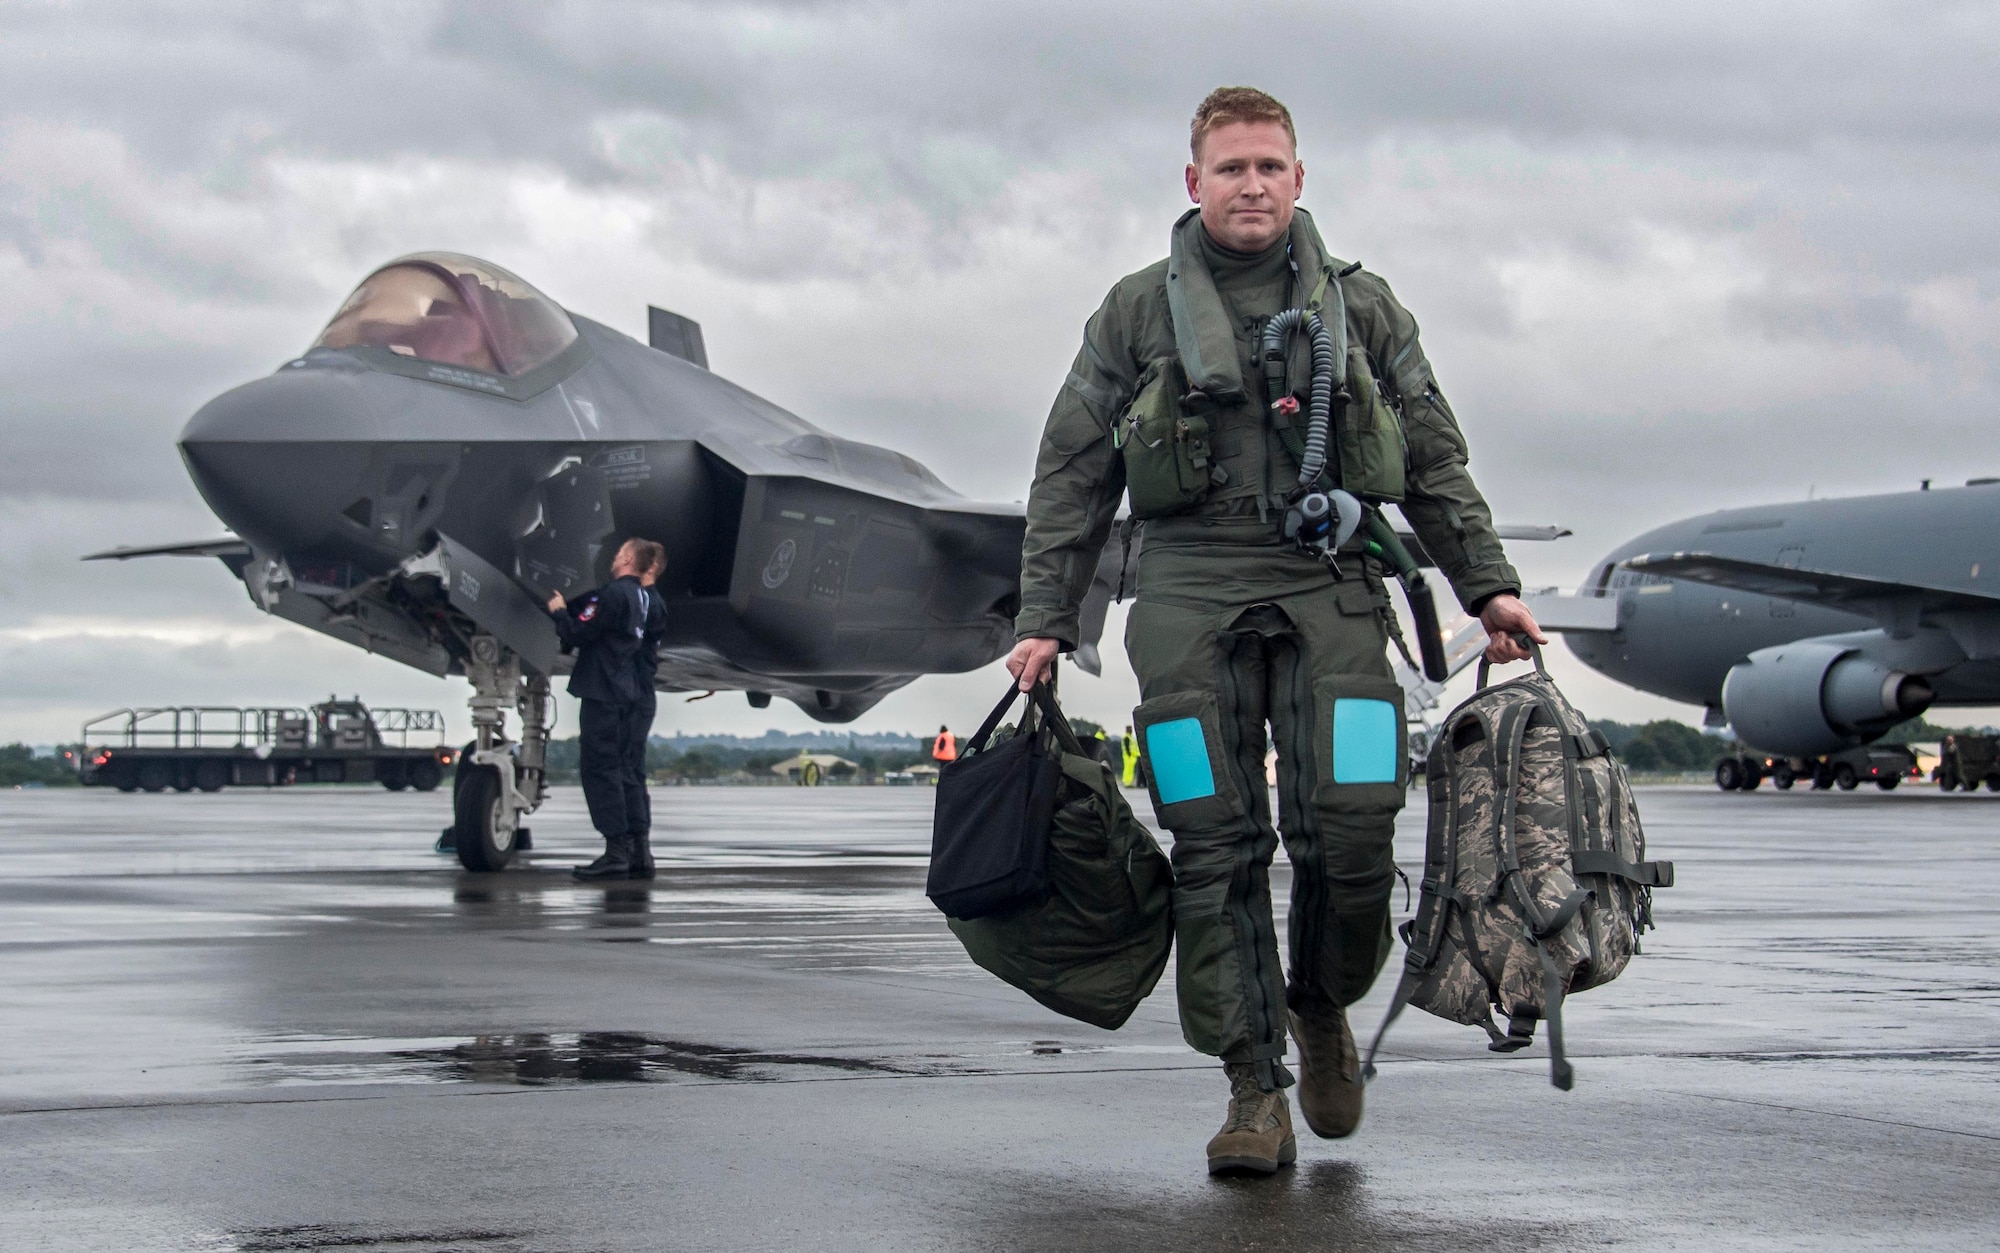 Maj. Daniel Daehler, 944th Operations Group Det. 2, F-35 instructor pilot, walks off the flightline at Royal Air Force Fairford, England, after flying a F-35 Lightning II from Luke Air Force Base, Arizona, to RAF Fairford making it his first trans-Atlantic flight and the first U.S. Air Force F-35 trans-Atlantic flight. The trip to the United Kingdom was in support of the Royal International Air Tattoo at Fairford in southern England. The group from Luke flew three F-35’s to the air show allowing the crowds to witness an aerial performance and were able to get up close to the aircraft with a static display. (U.S. Air Force photo by Tech. Sgt. Jarad Denton)